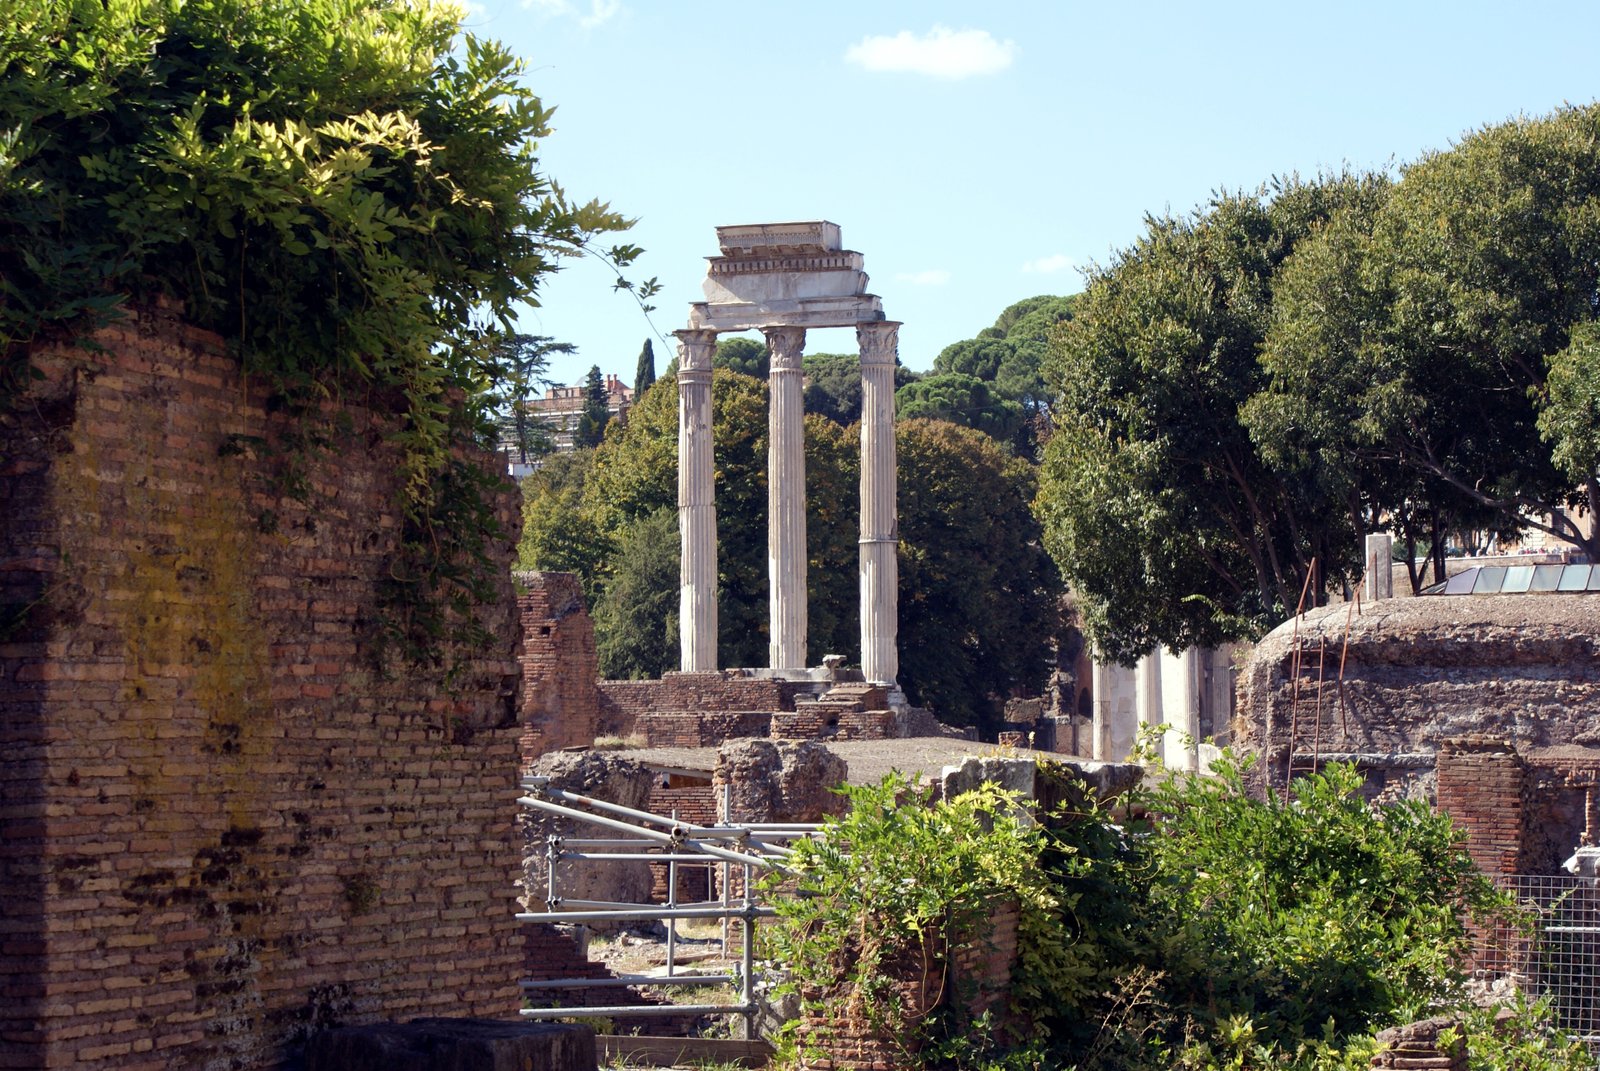 The Forum in Rome, Italy has such history. Ancient Rome is worth visiting and it is just minutes from the Colosseum.